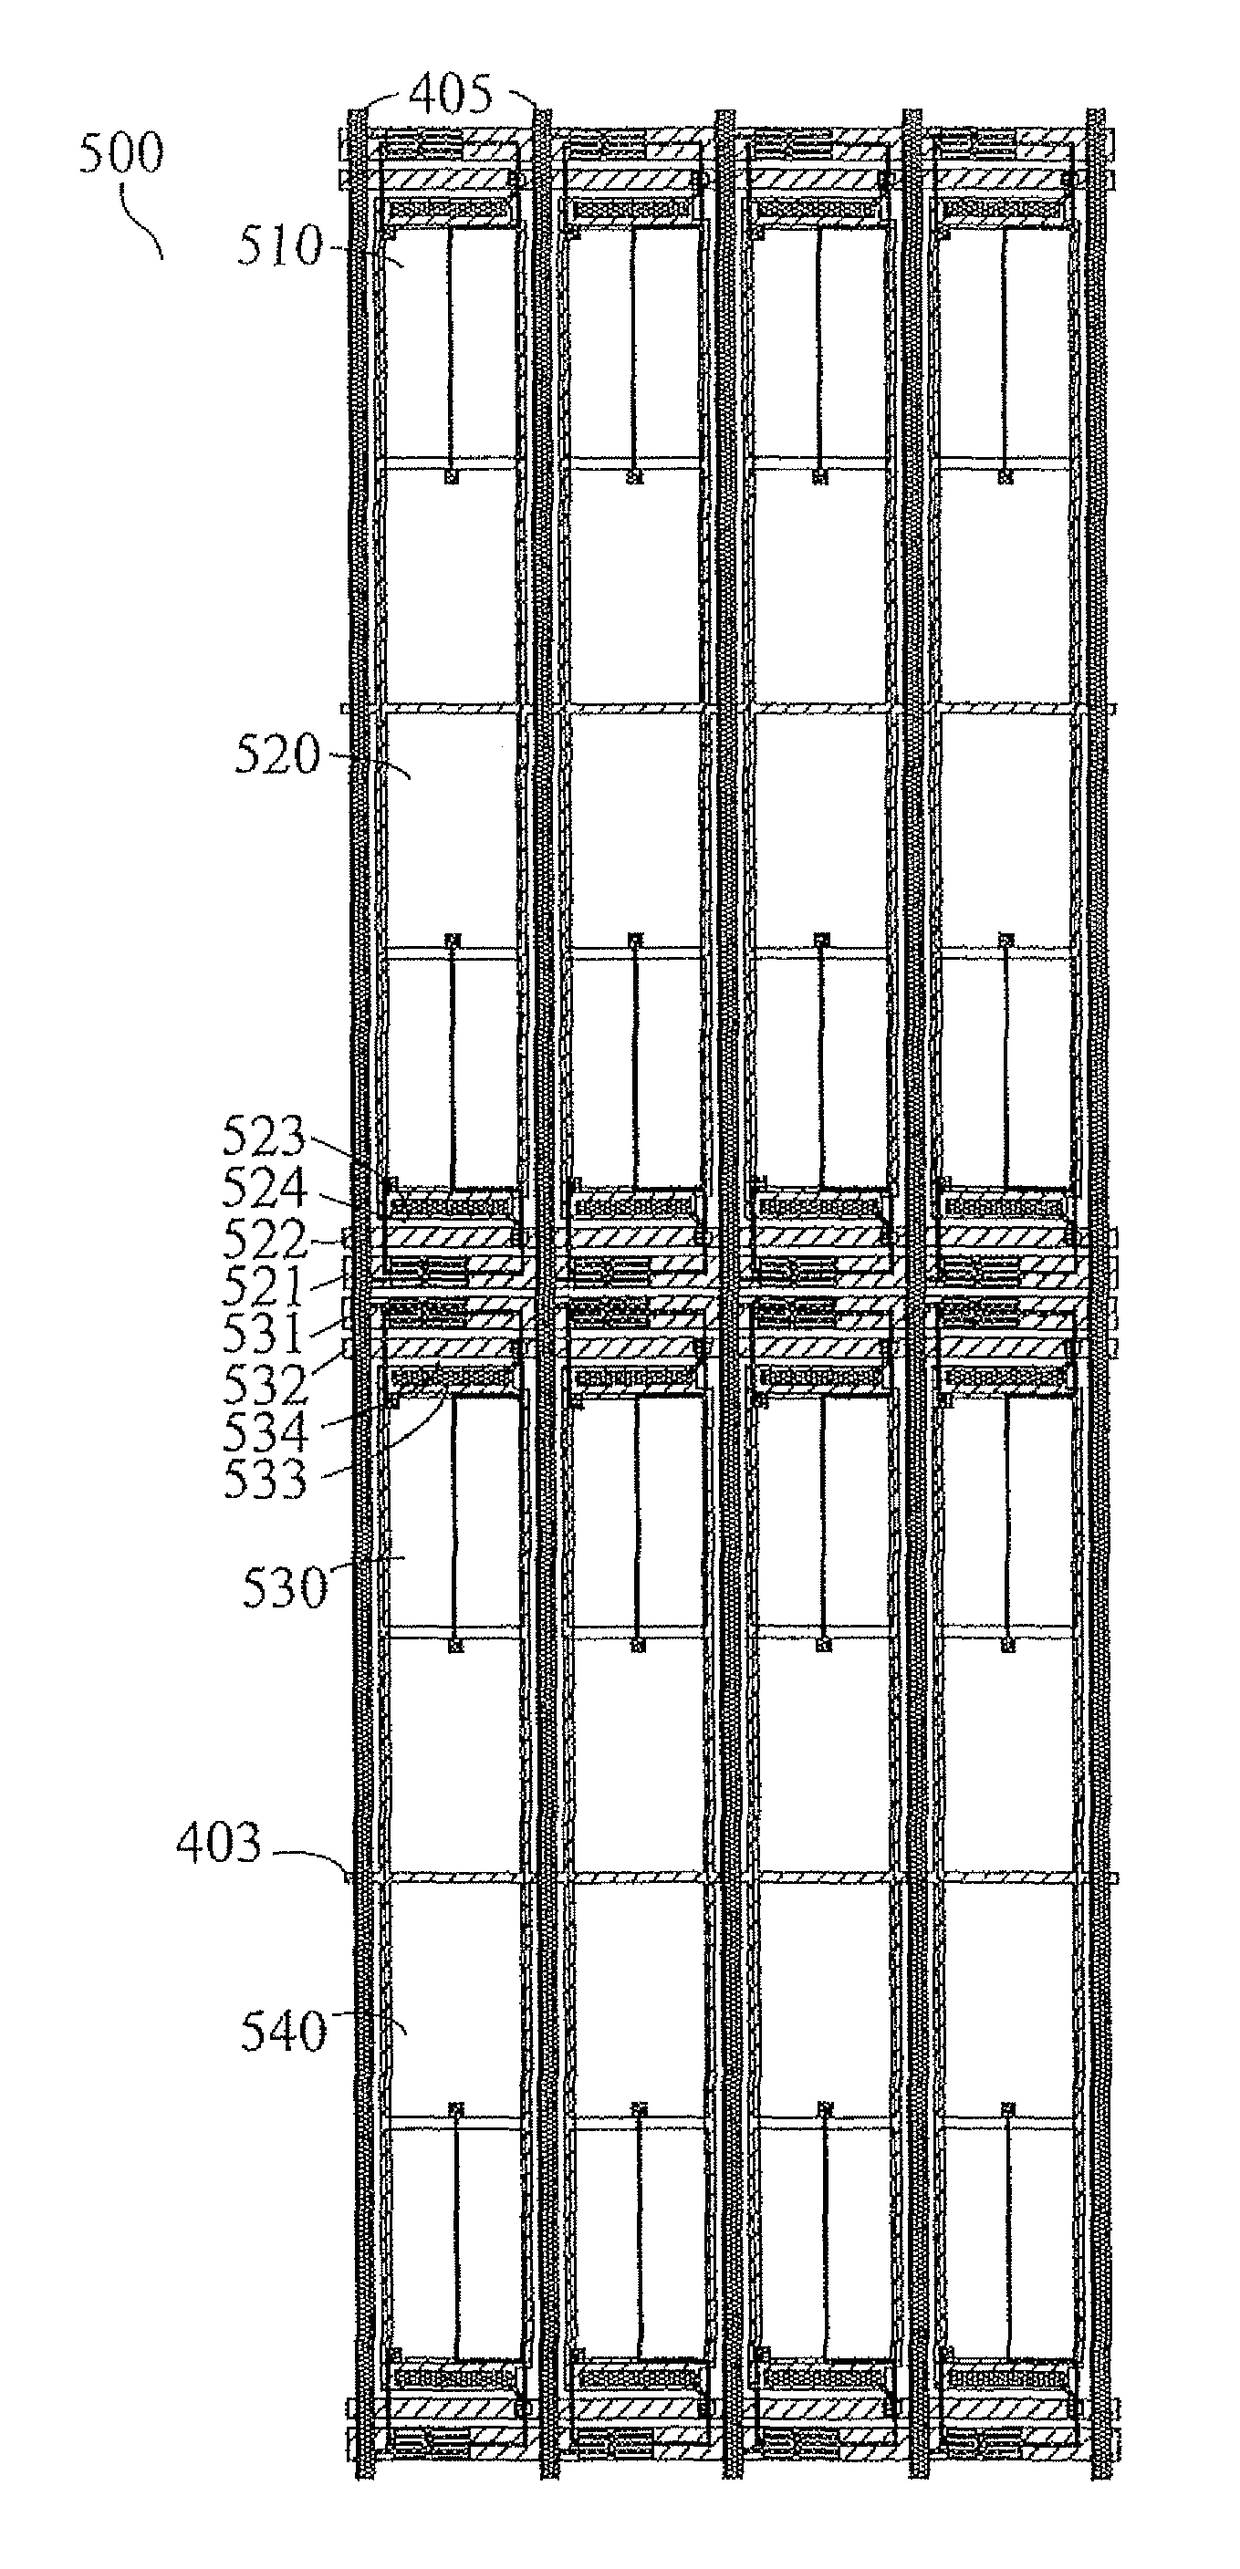 Liquid crystal display for eliminating movable mura